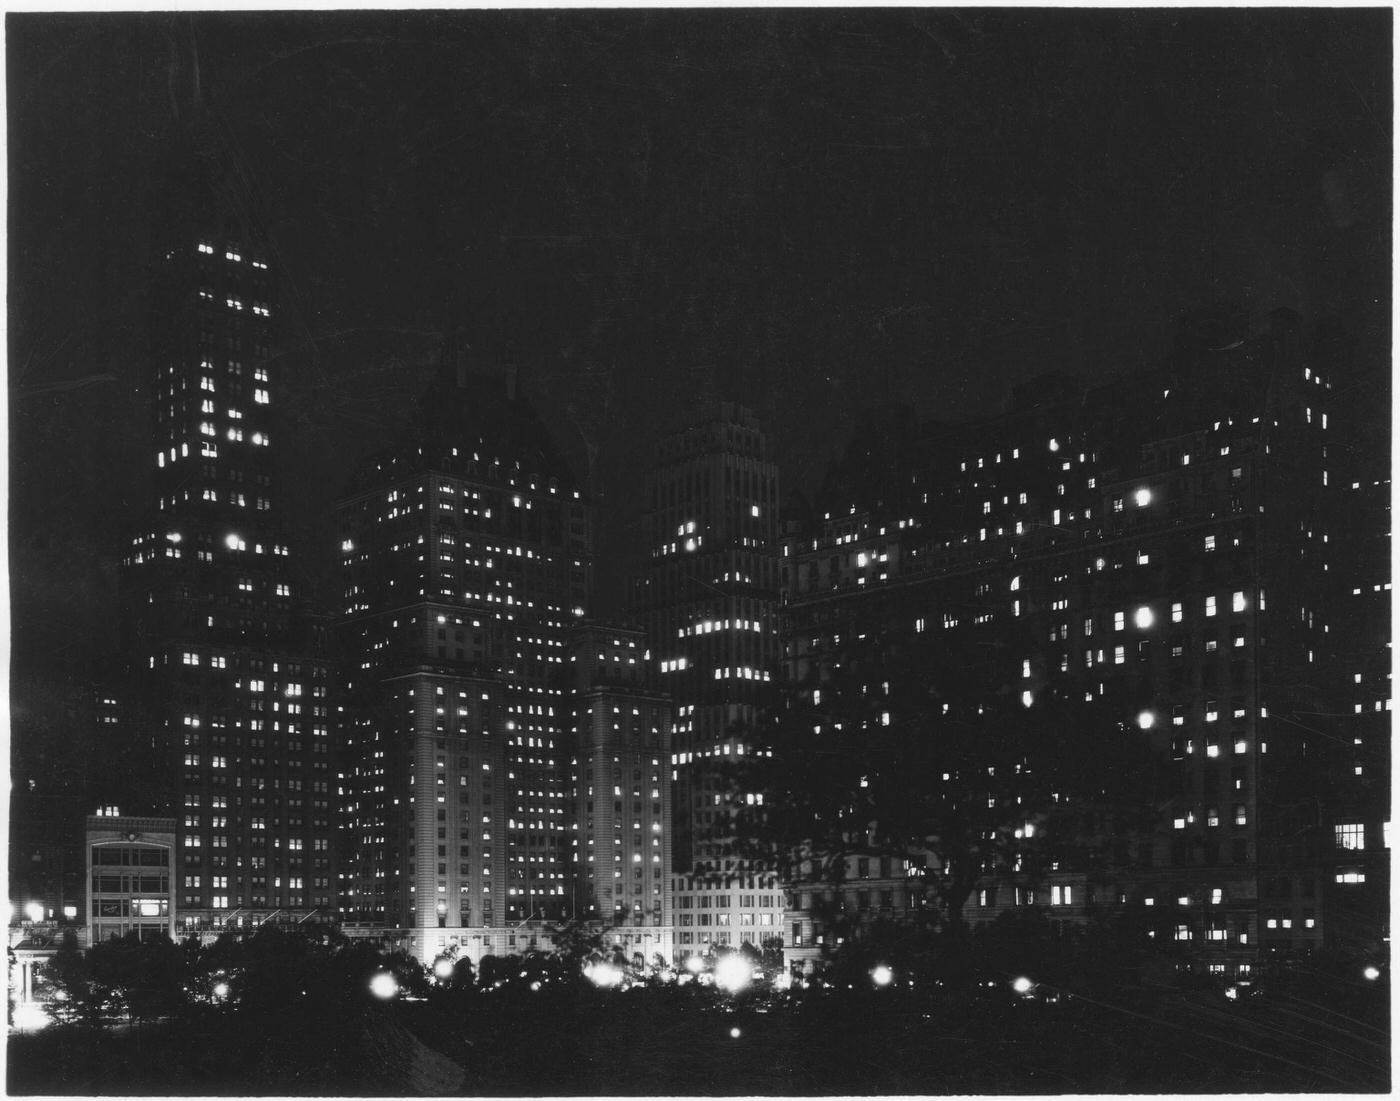 Skyline At Night, From Southeast Corner Of Central Park, New York City, 1929.